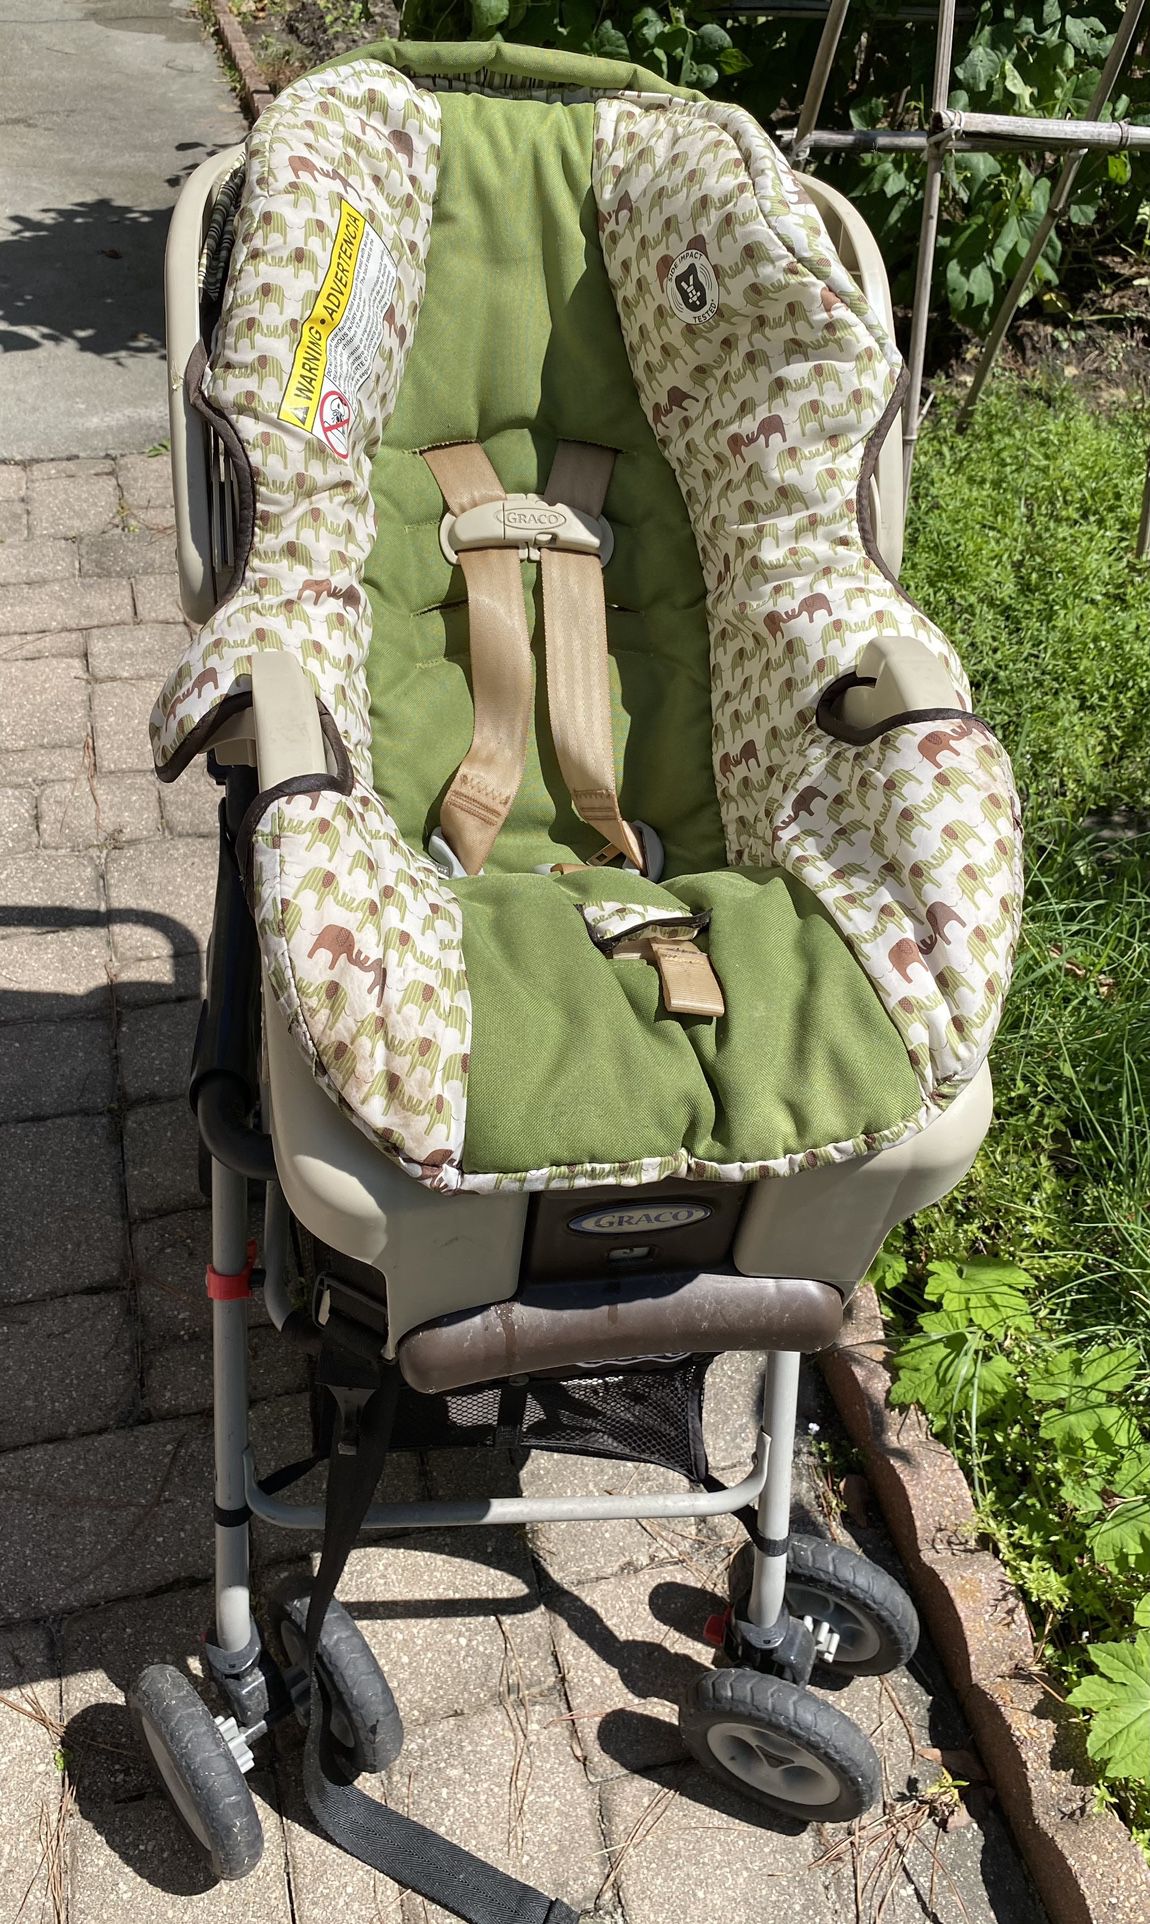 Graco Car Seat And Carrier